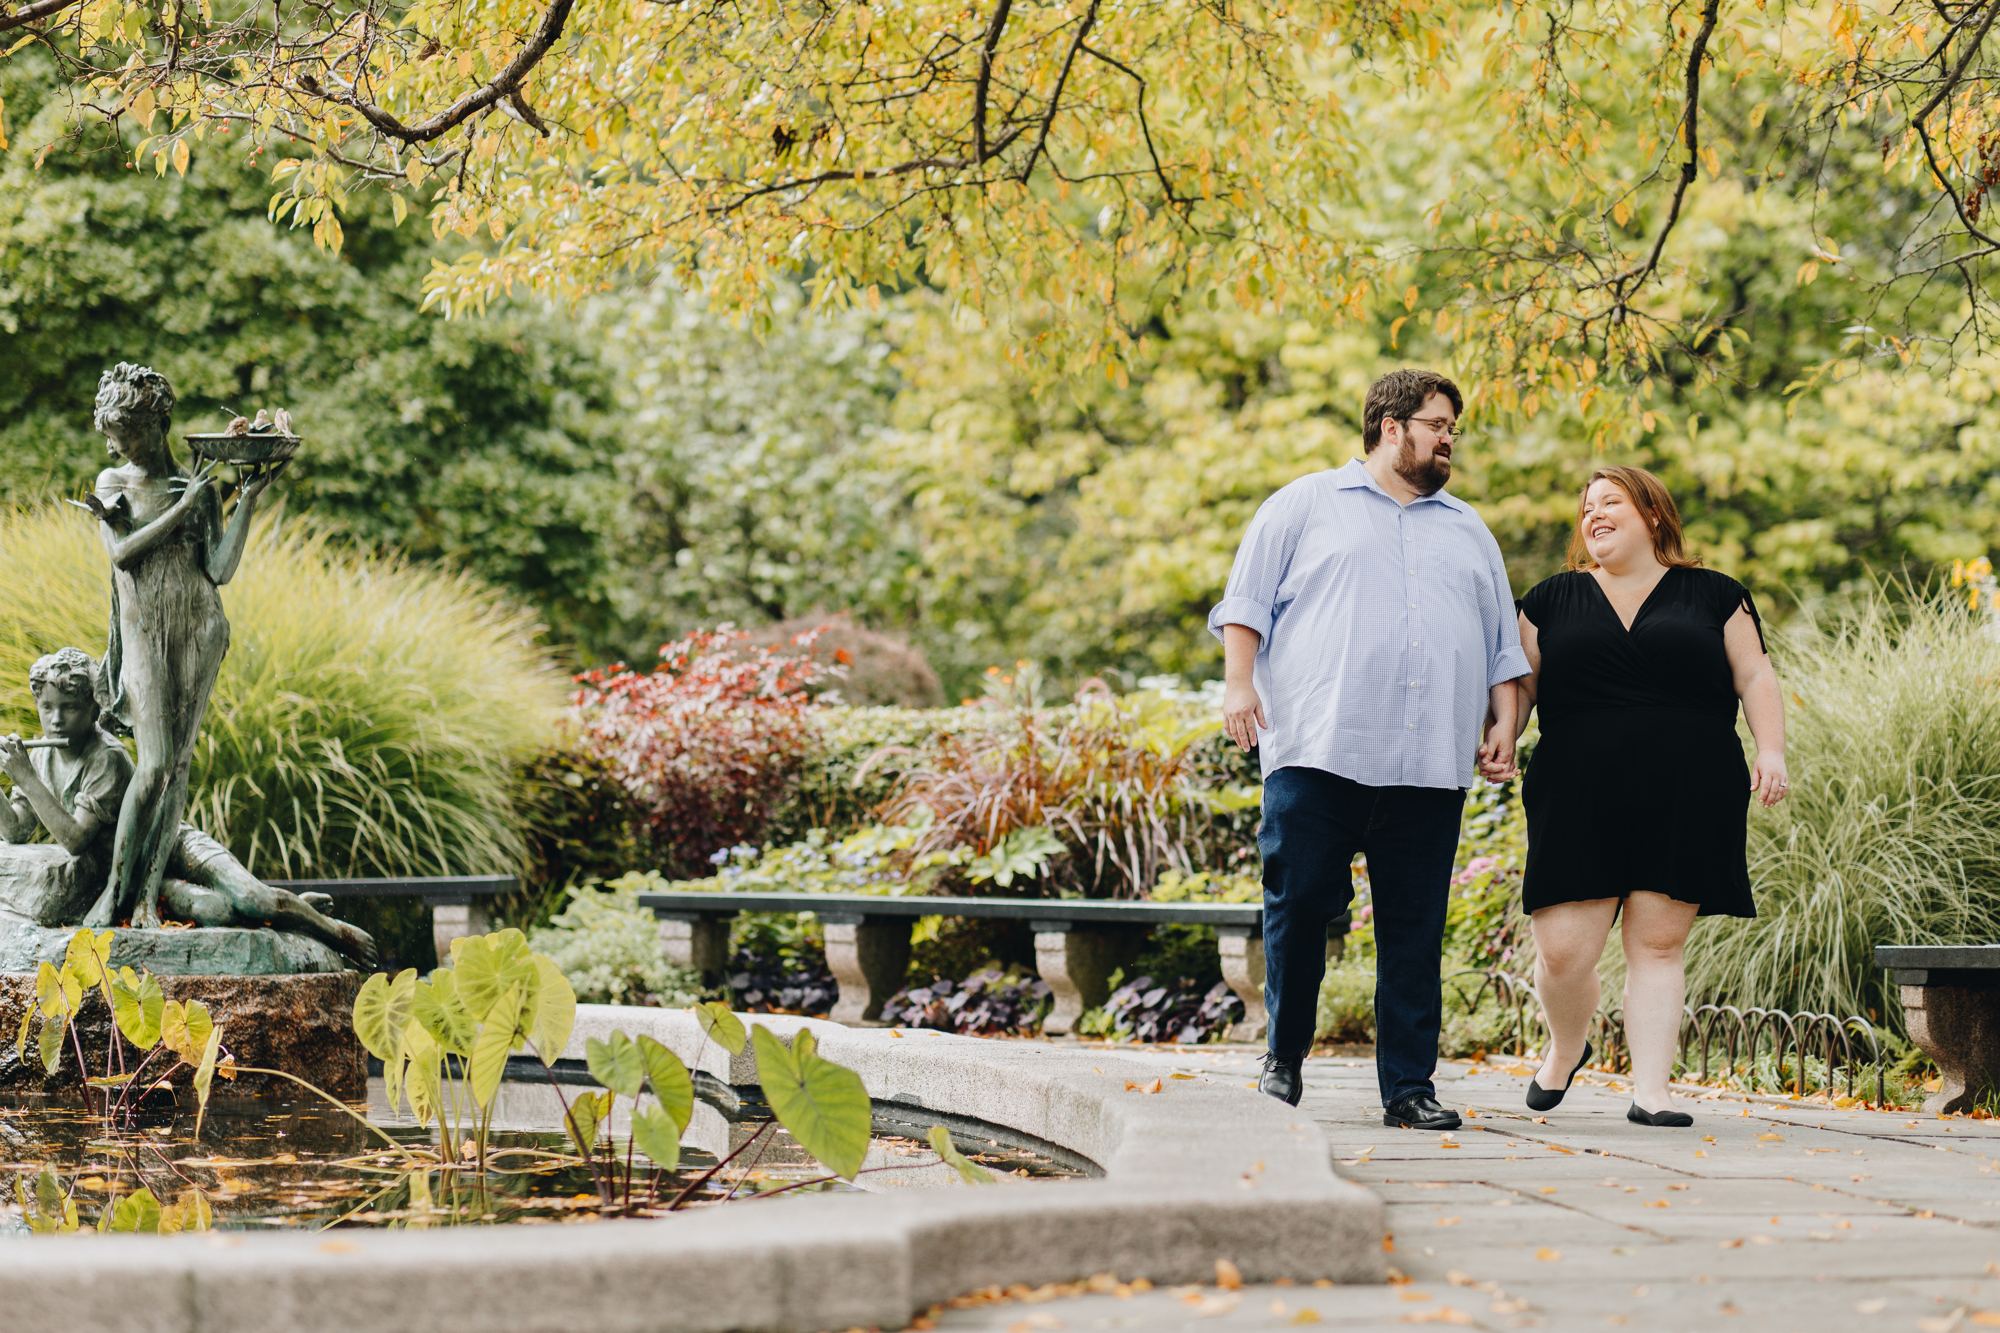 Incredible Autumn Conservatory Garden Engagement Photography